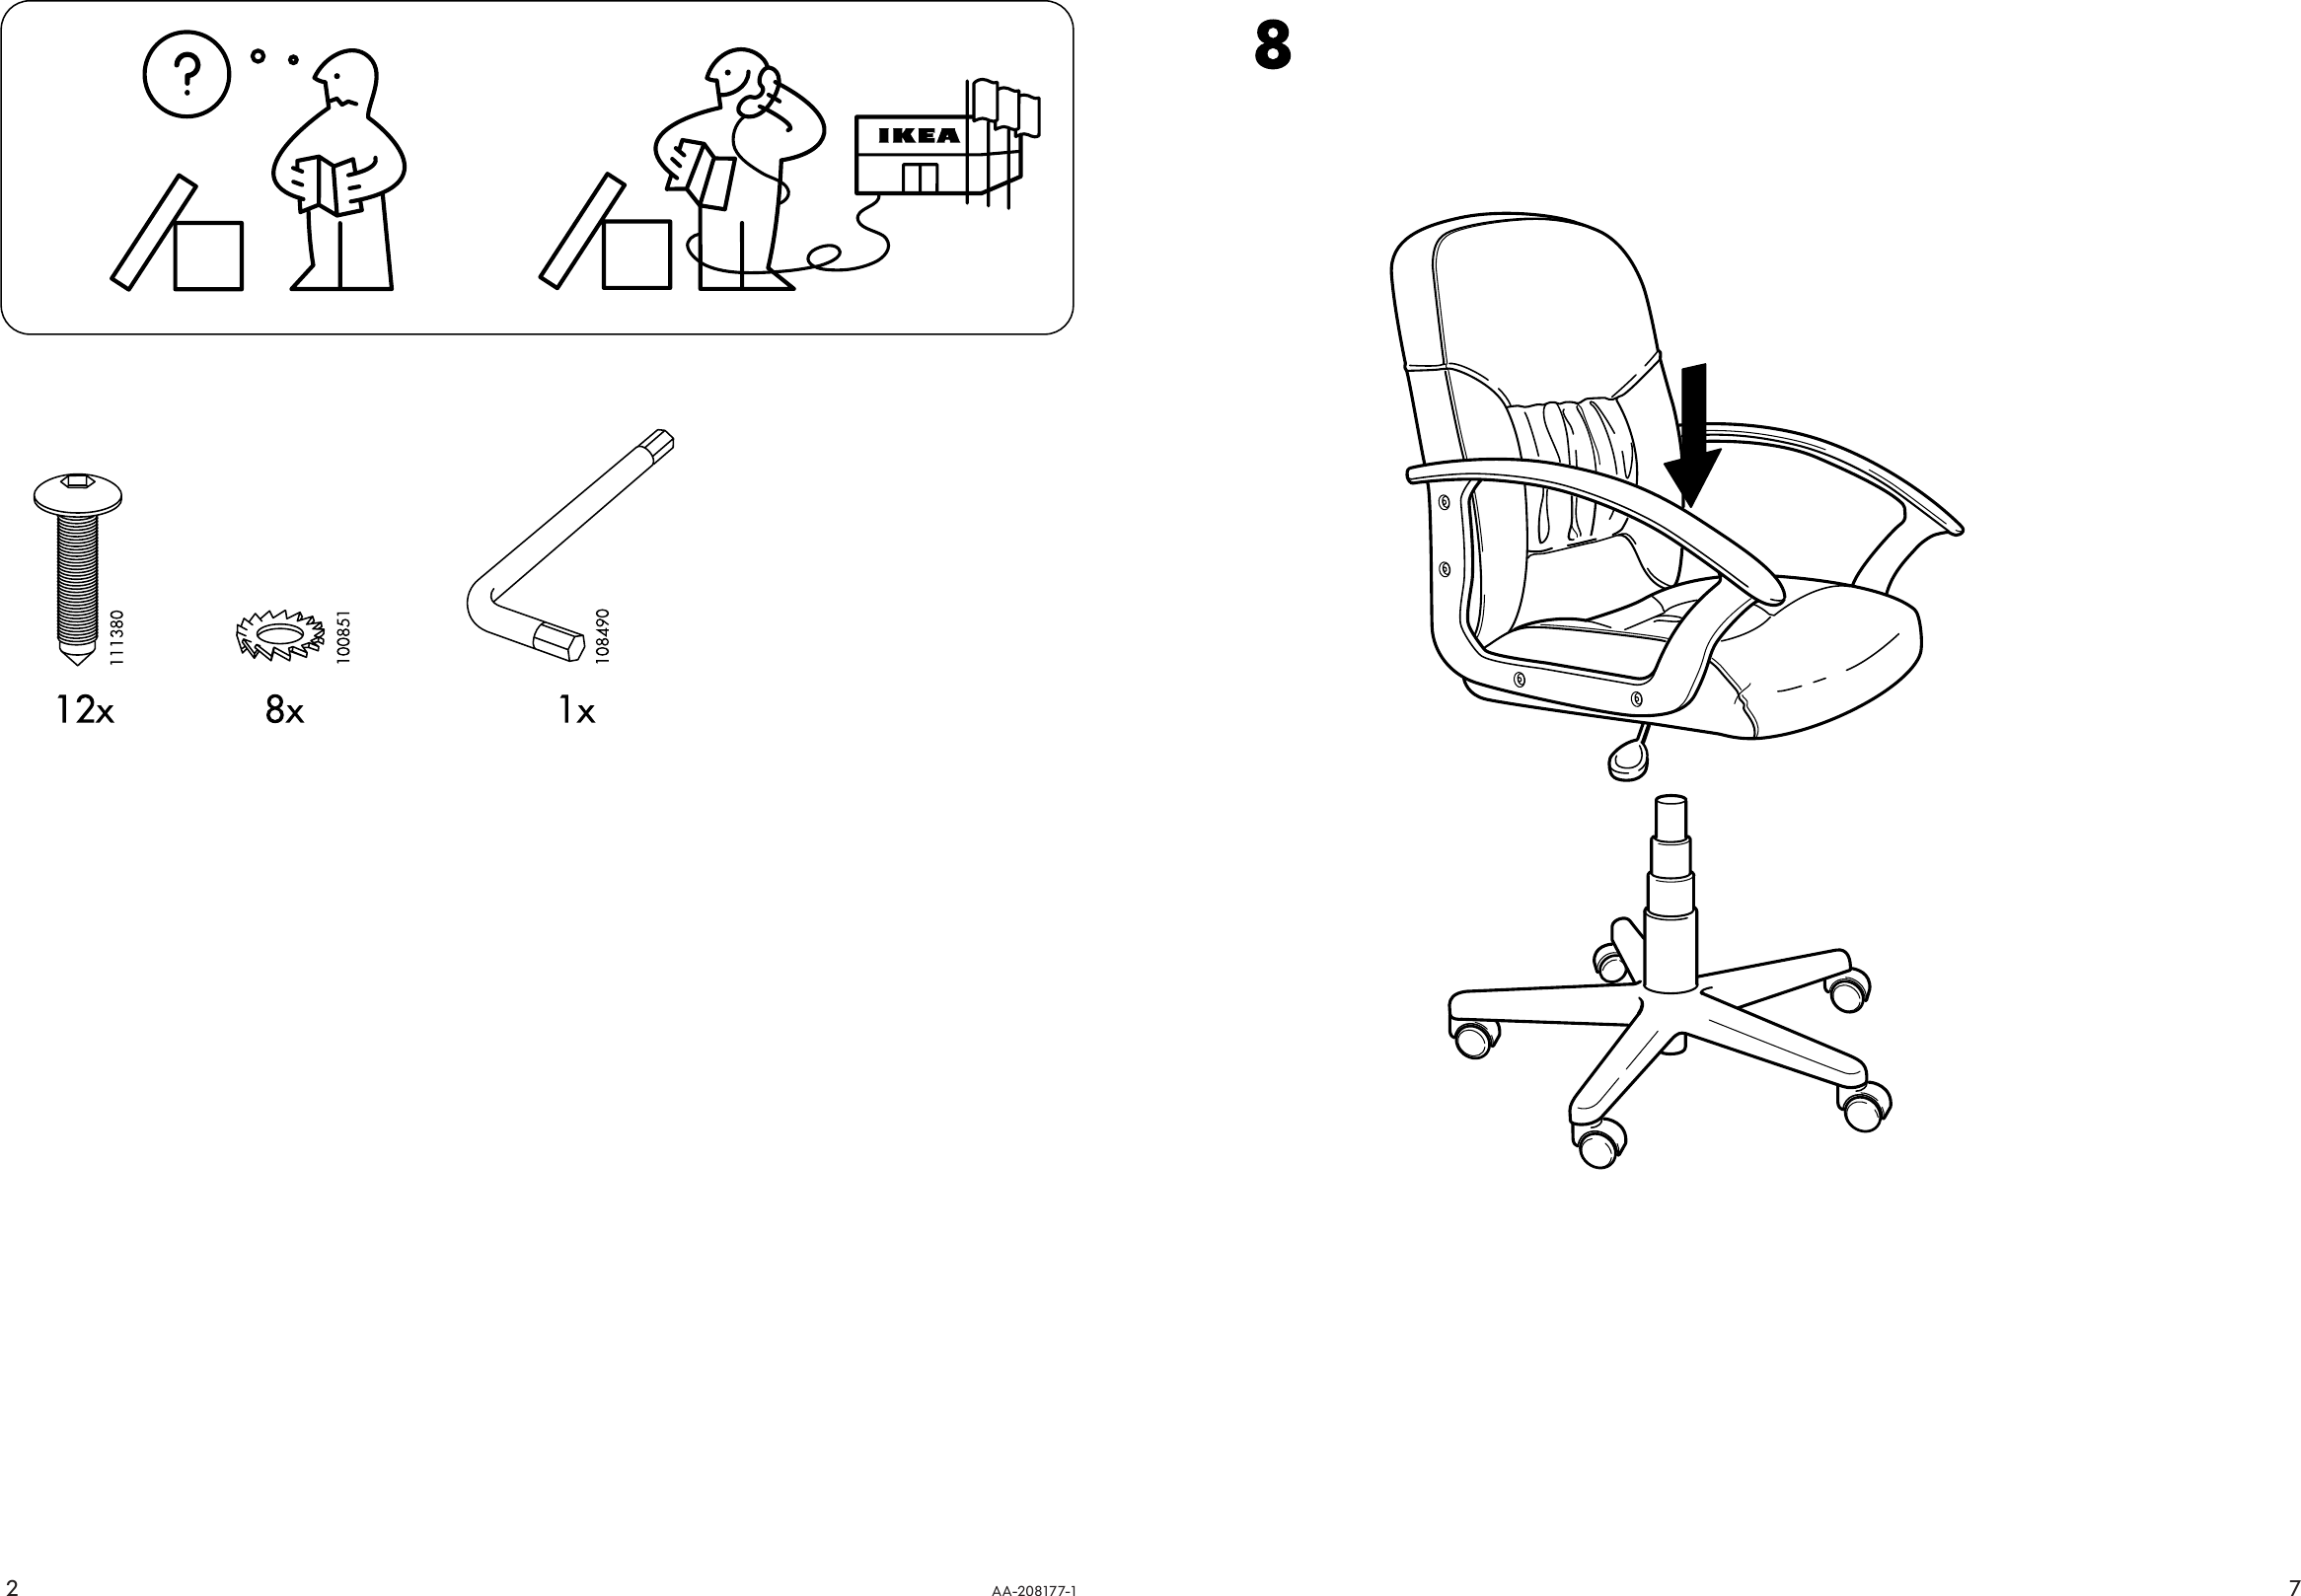 Ikea Moses Swivel Chair Assembly Instruction